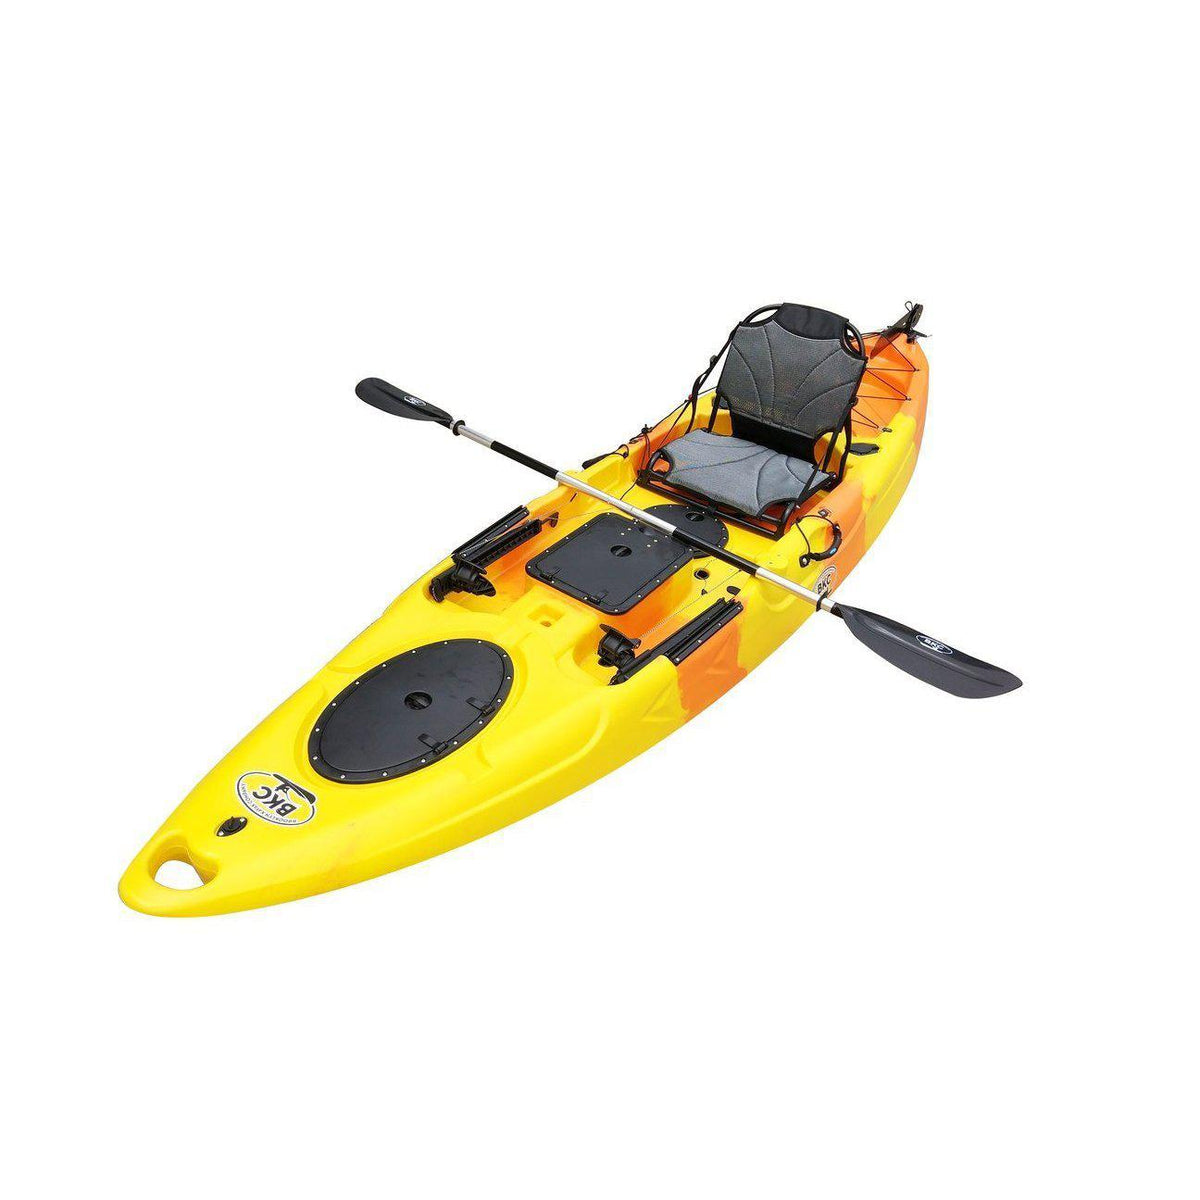 BKC UH-RA220 11-Foot 6-Inch Angler Sit On Top Fishing Kayak with 2- Paddles, 1-Upright Seat and Rudder System Included